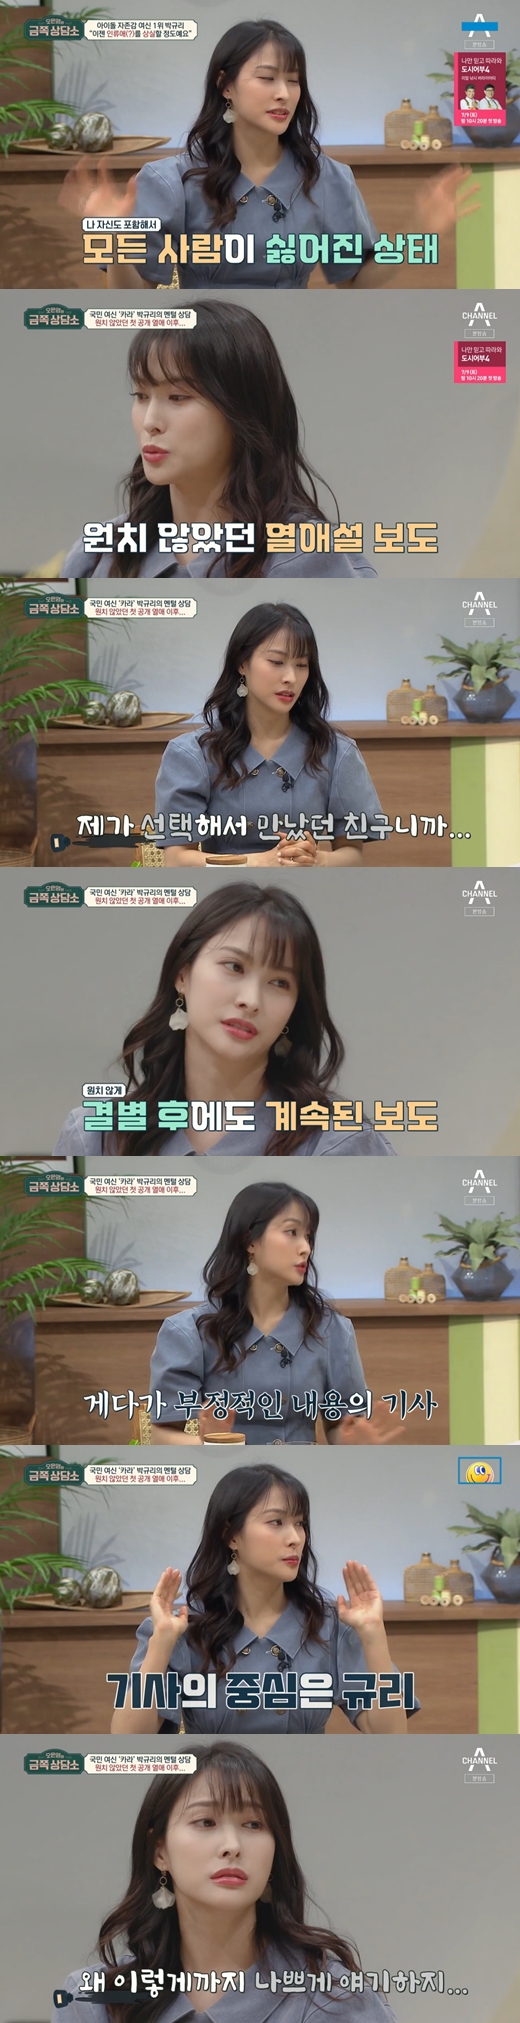 Group KARA Park Gyuri has revealed the mental suffering of the last two or three years.On the 24th, Channel A Oh Eun-youngs Gold Counseling Center appeared in the group KARA leader Park Gyuri and told Oh Eun Young about his troubles.Park Gyuri said, Because of the self-esteem that is seen on the air, human troubles can not actually be said.I am an entertainer, a member of KARA, and I have the idea that I should not tell my flaws because of various positions. Park Gyuri said, I have been active since I was a child, so I have such an idea. But Alone seems to have a heartache.In the end, when I see my bottom, people are disappointed and I think I will leave. Park Gyuri began to tell Oh Eun Young his inside story: Its been tough because the last two or three years have been so much work.Then, at the end of last year, I broke down in Gangneung early this year, and I lived an isolated life. I lost touch.At that time, I thought that this was how I lived. I actually think that humanity has disappeared, and I hate it, I hate people, I hate people, I do not want to see it, he said. I did not want it, but I had a public love affair.I met the Friend and got a lot of bad news. I was involved in things that were not related after the breakup because I was a general person.So I was in a situation where I was insulted even if I stayed still. There was a media company that made me blackmail - Cinémix Par Chloé with DM. Park Gyuris current state of Melencolia I was worse than thought; he said: Melencolia I feel high, not my original state.I keep thinking that I should not be gone. What is important in life? There is no point.So I keep thinking, Why should I be holding on? He said.The name Park Gyuri had taken out hard was the late Goo Hara, who said: Im not blaming you.When member Goo Hara died, for the first time, my thoughts, Values, collapsed; I had never thought that he would leave.In fact, the same member left at this moment, and I think I can come out here and talk about this: Friend, who was in his twenties, and I really didnt think...After that, it was true that I thought that there was such a How. 